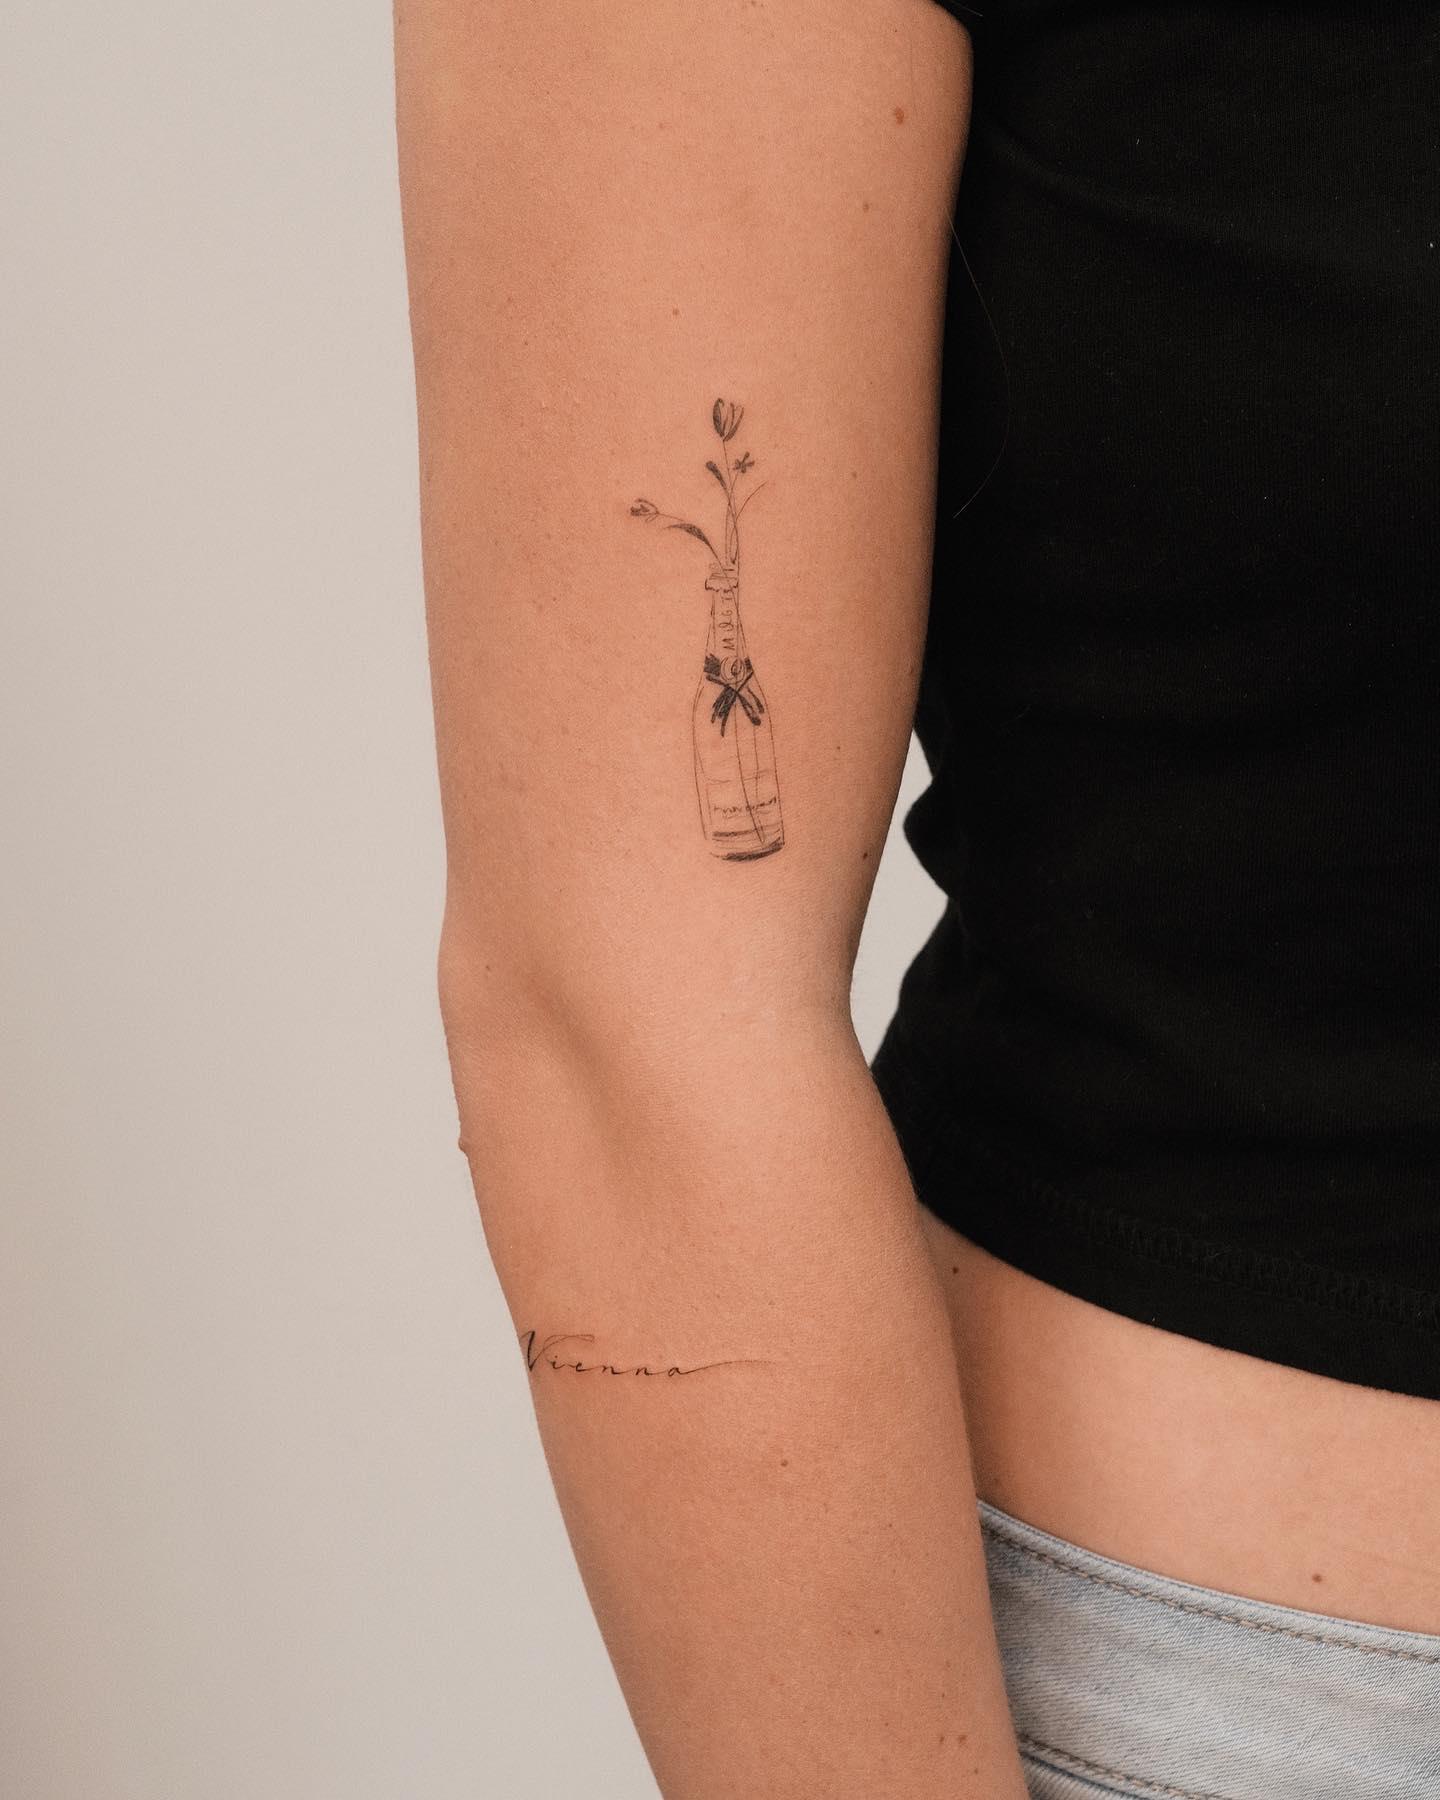 Cute tattoo designs for girls to get inspired